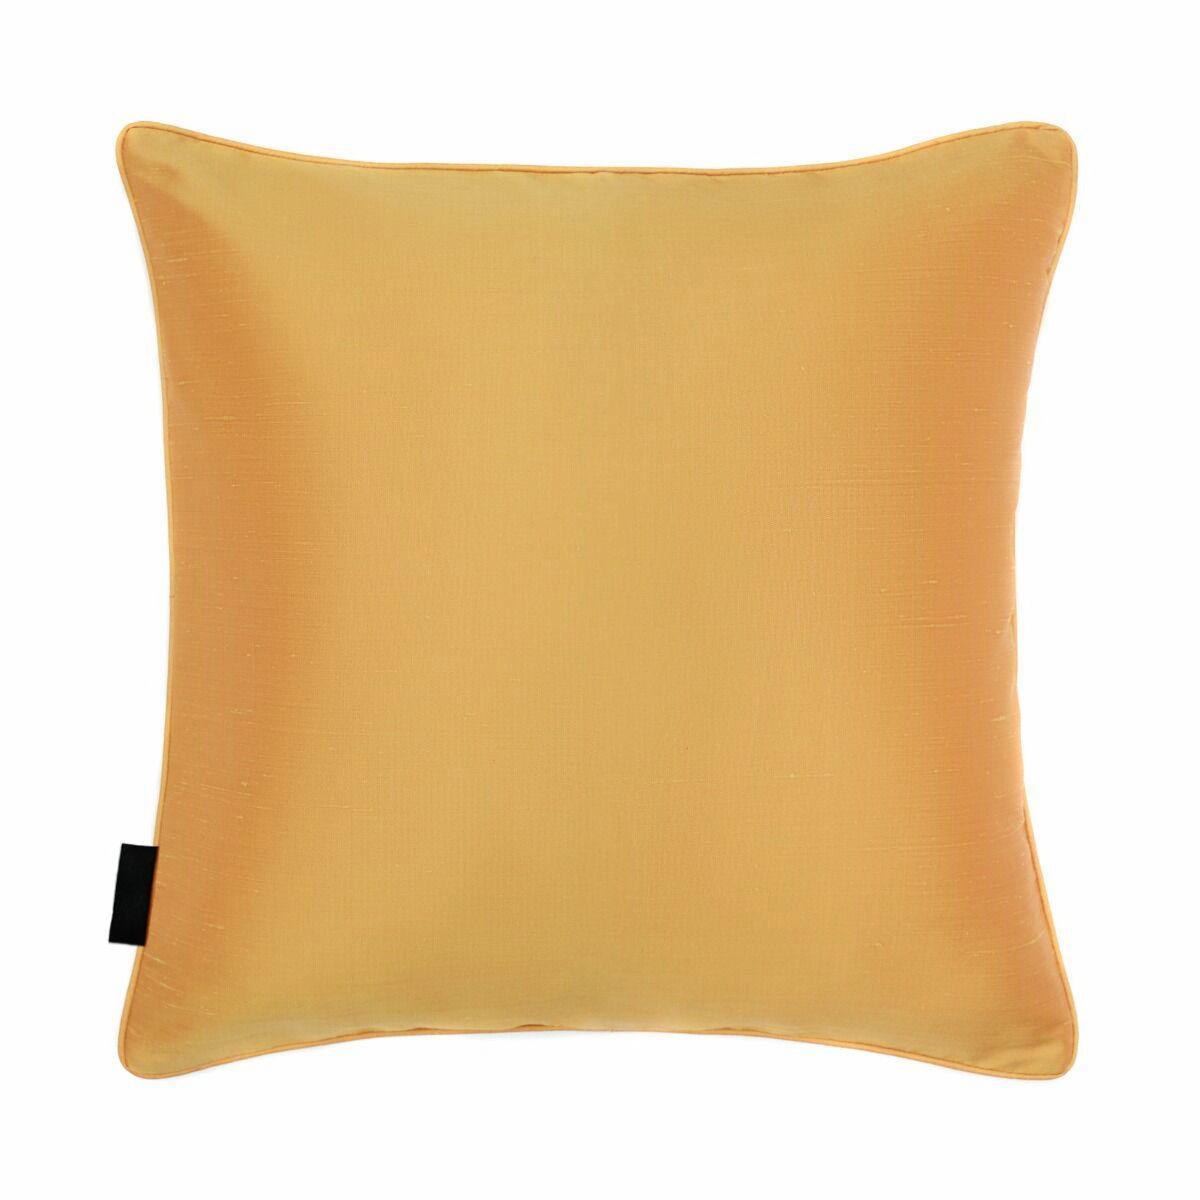 Chase Cushion Cover 18" - Black/Yellow